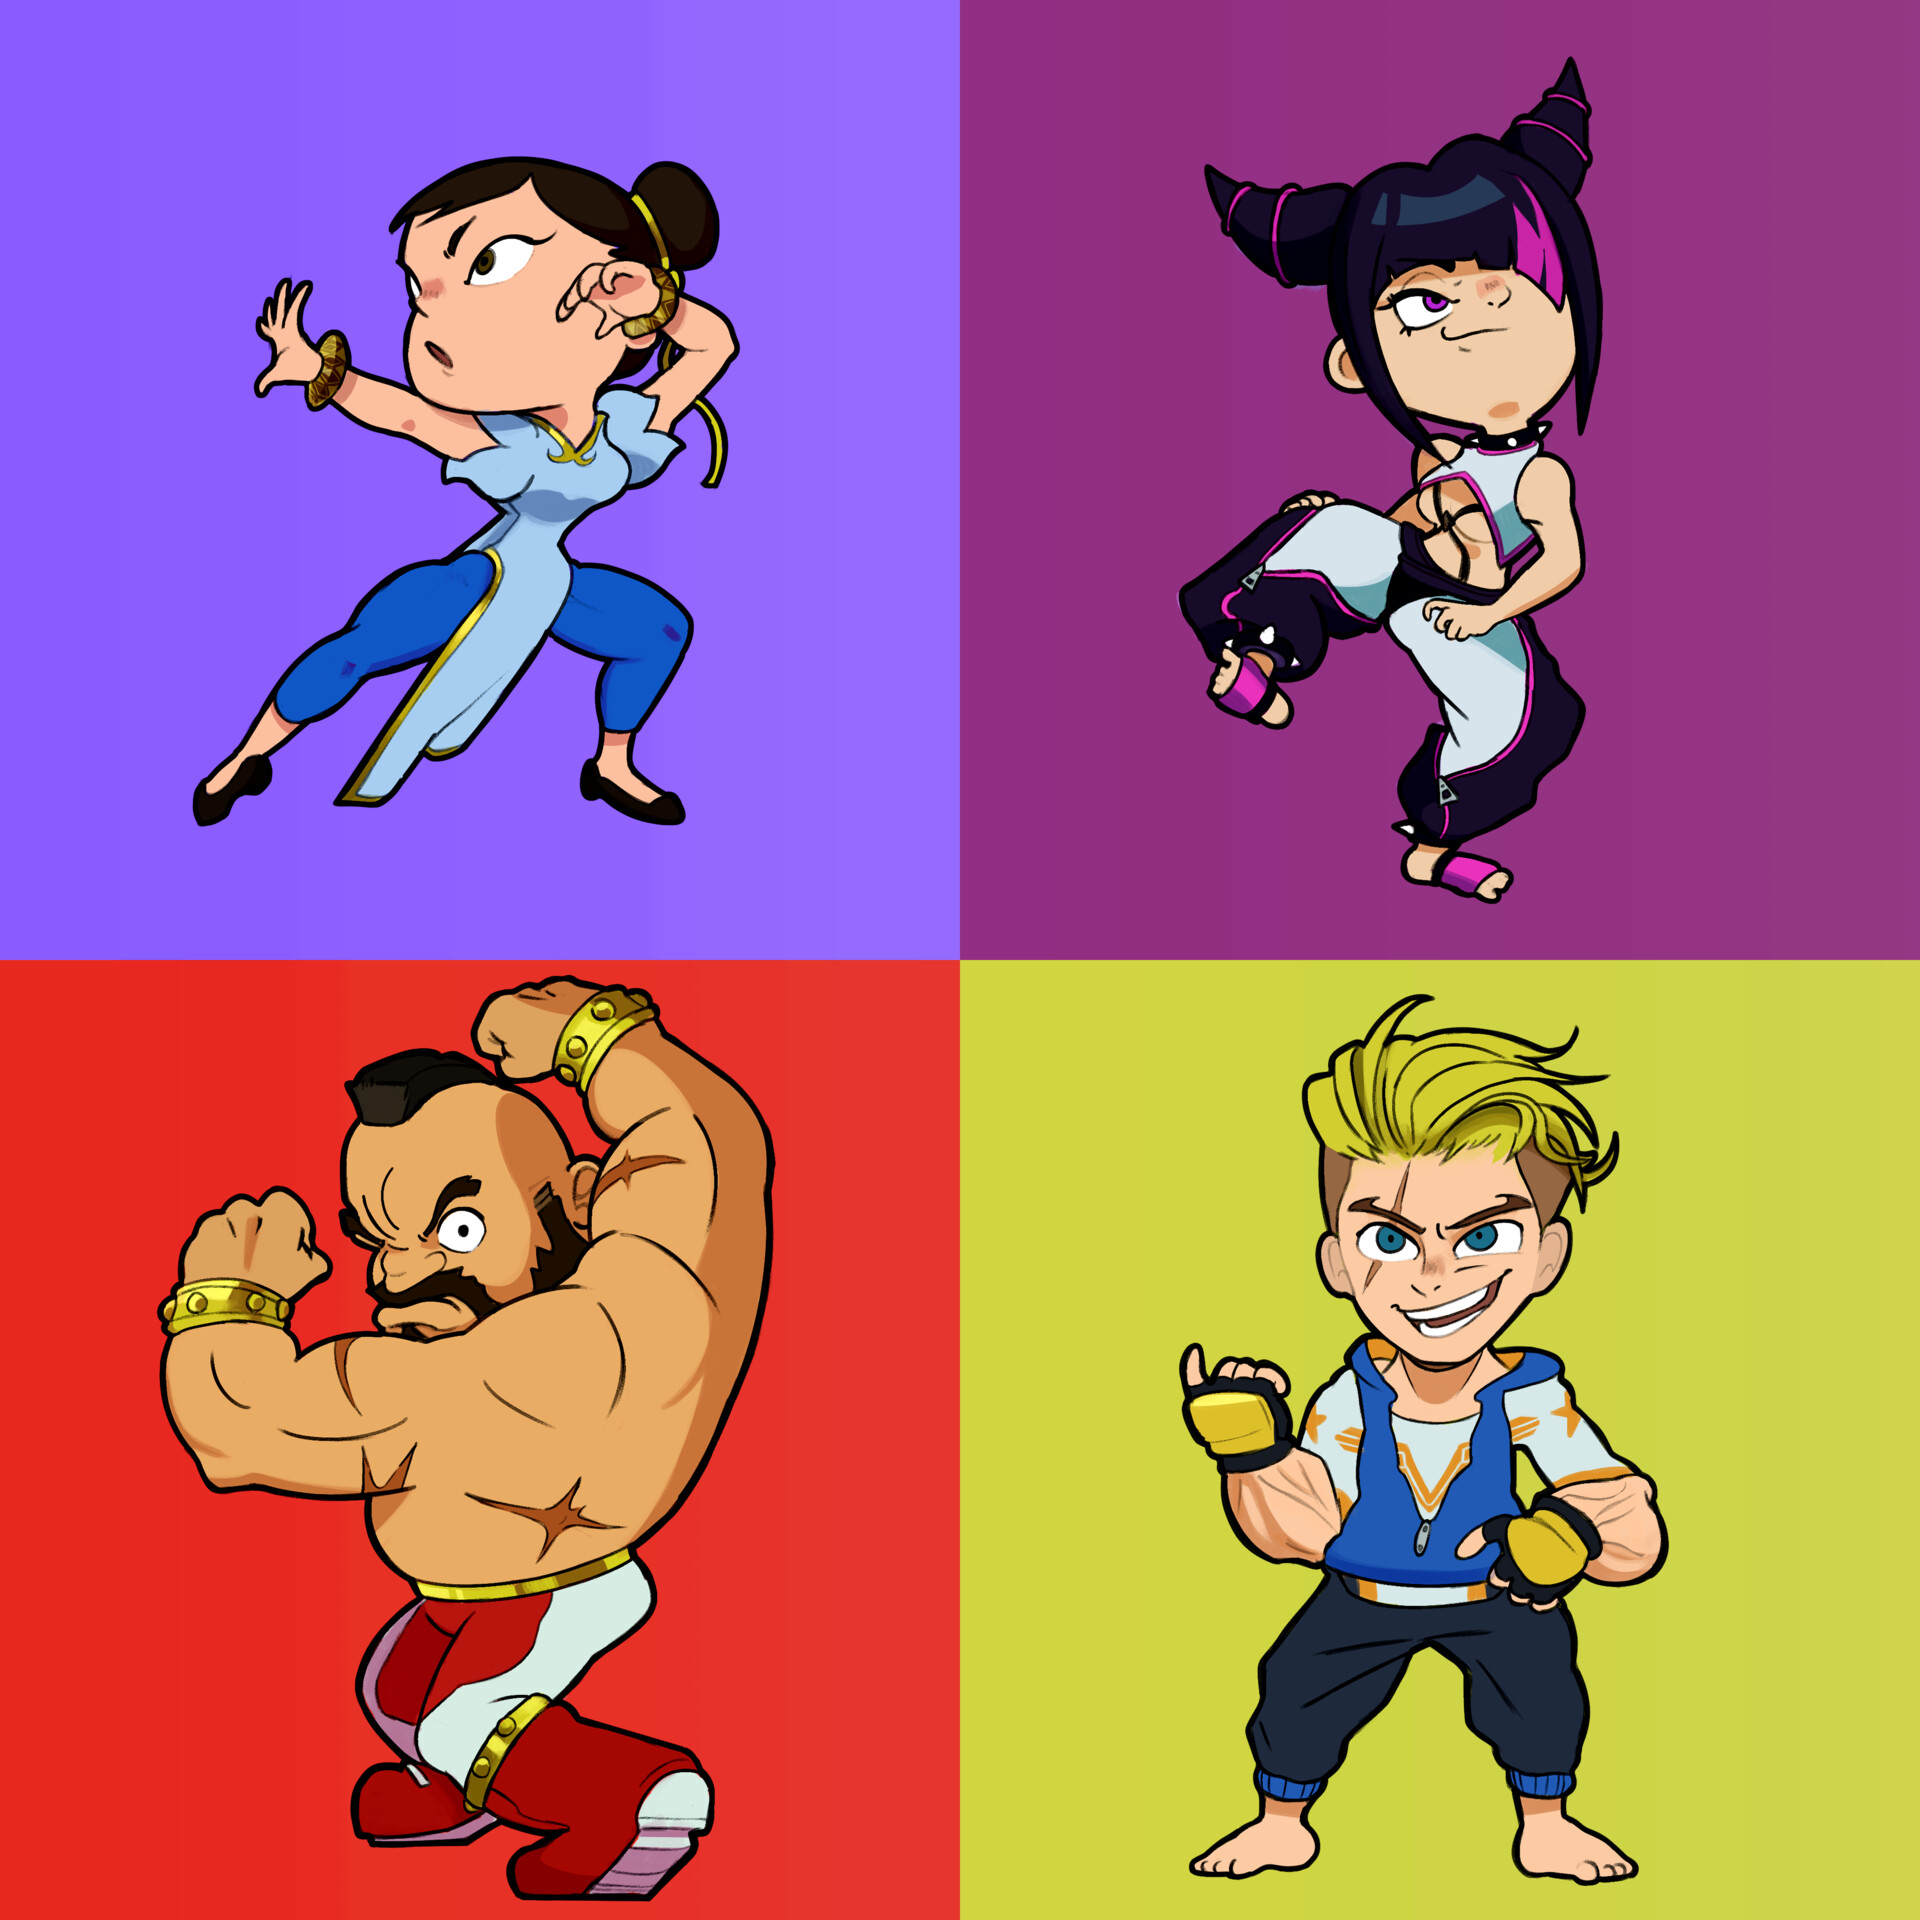 CHARACTERS, STREET FIGHTER 6